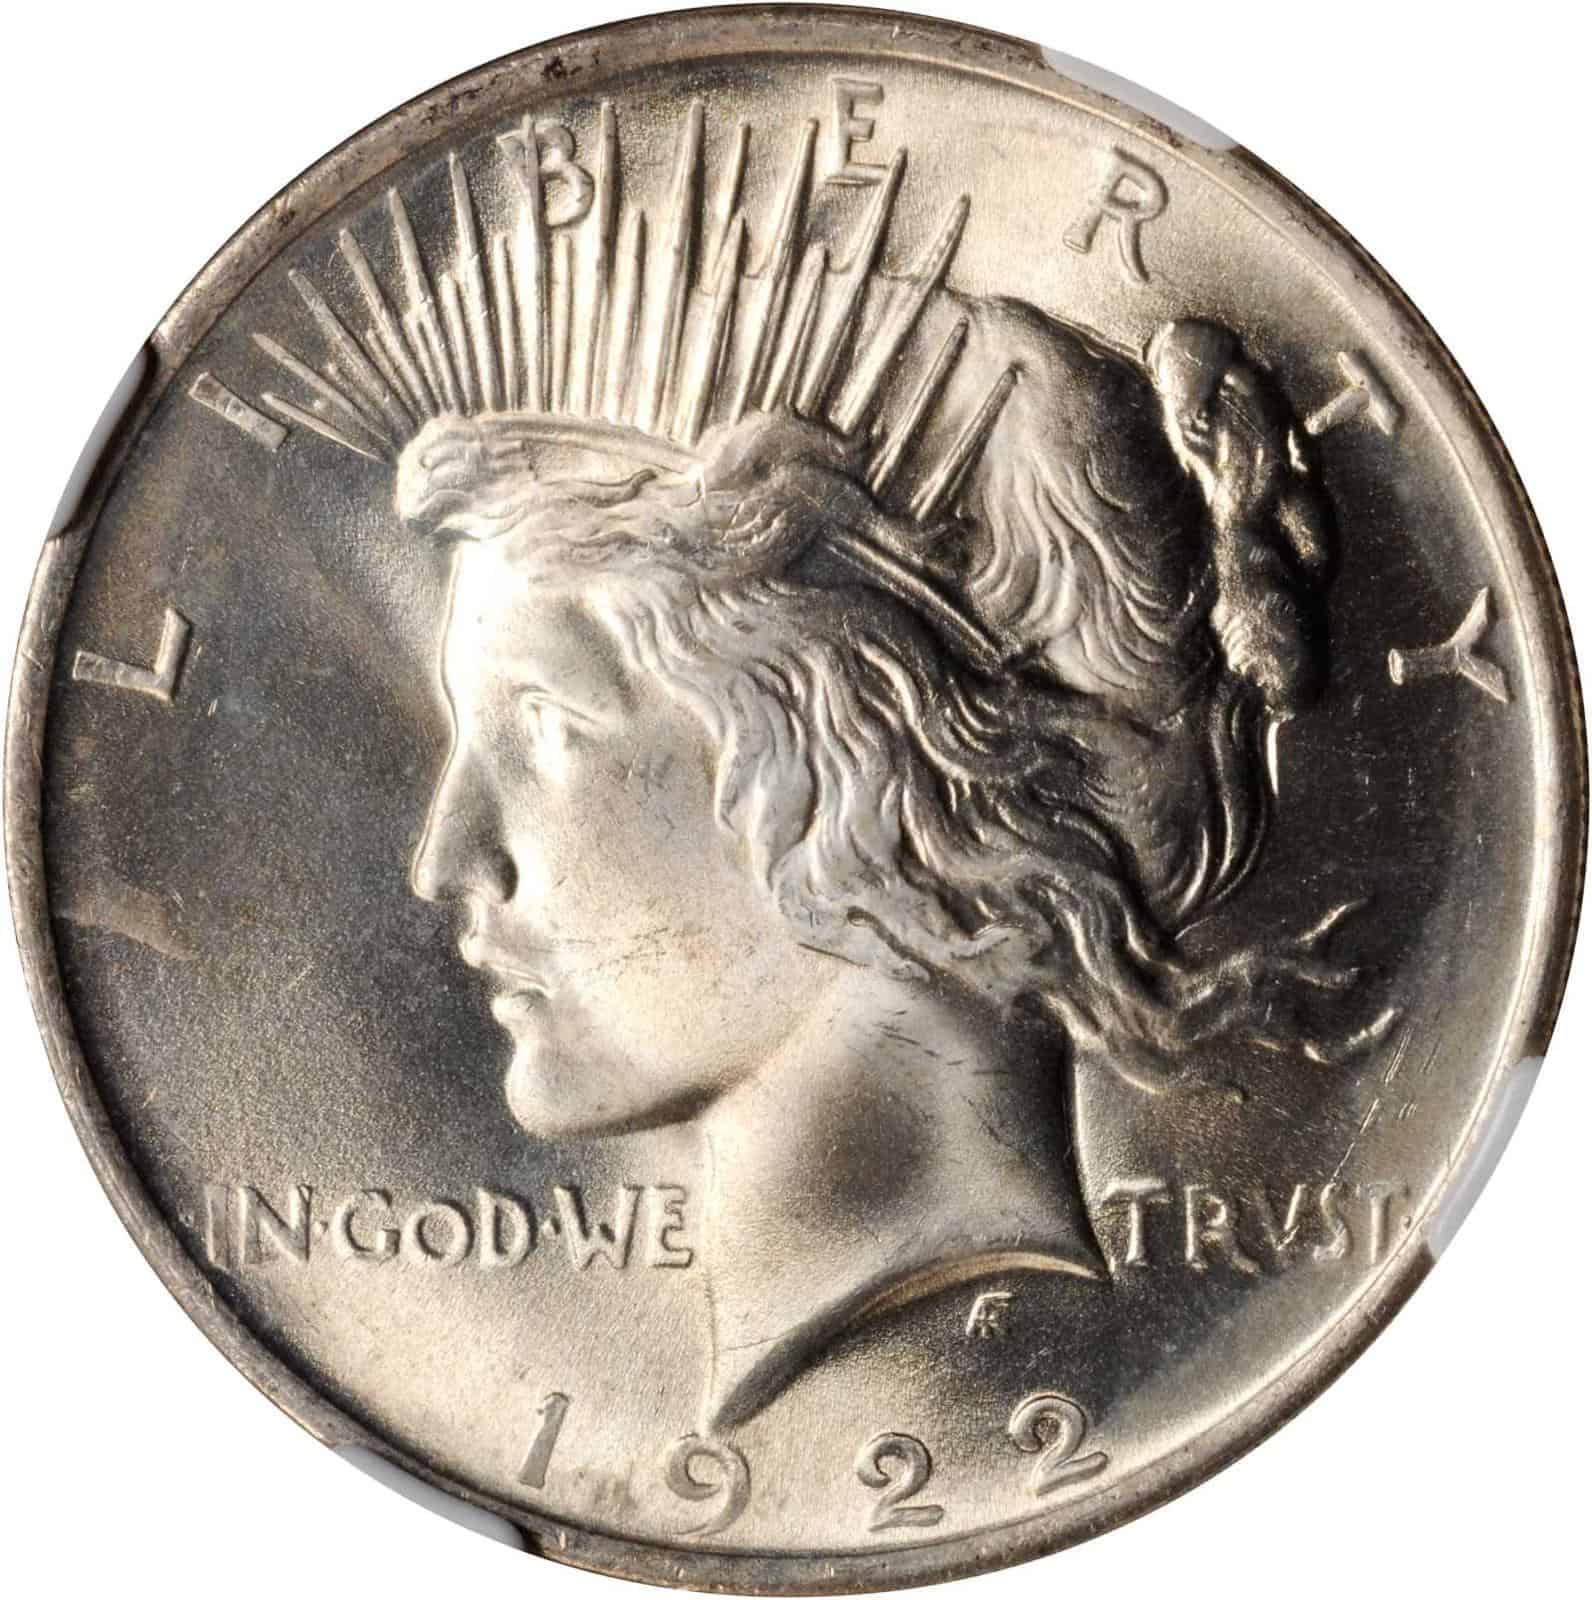 The Obverse of the 1922 Silver Dollar